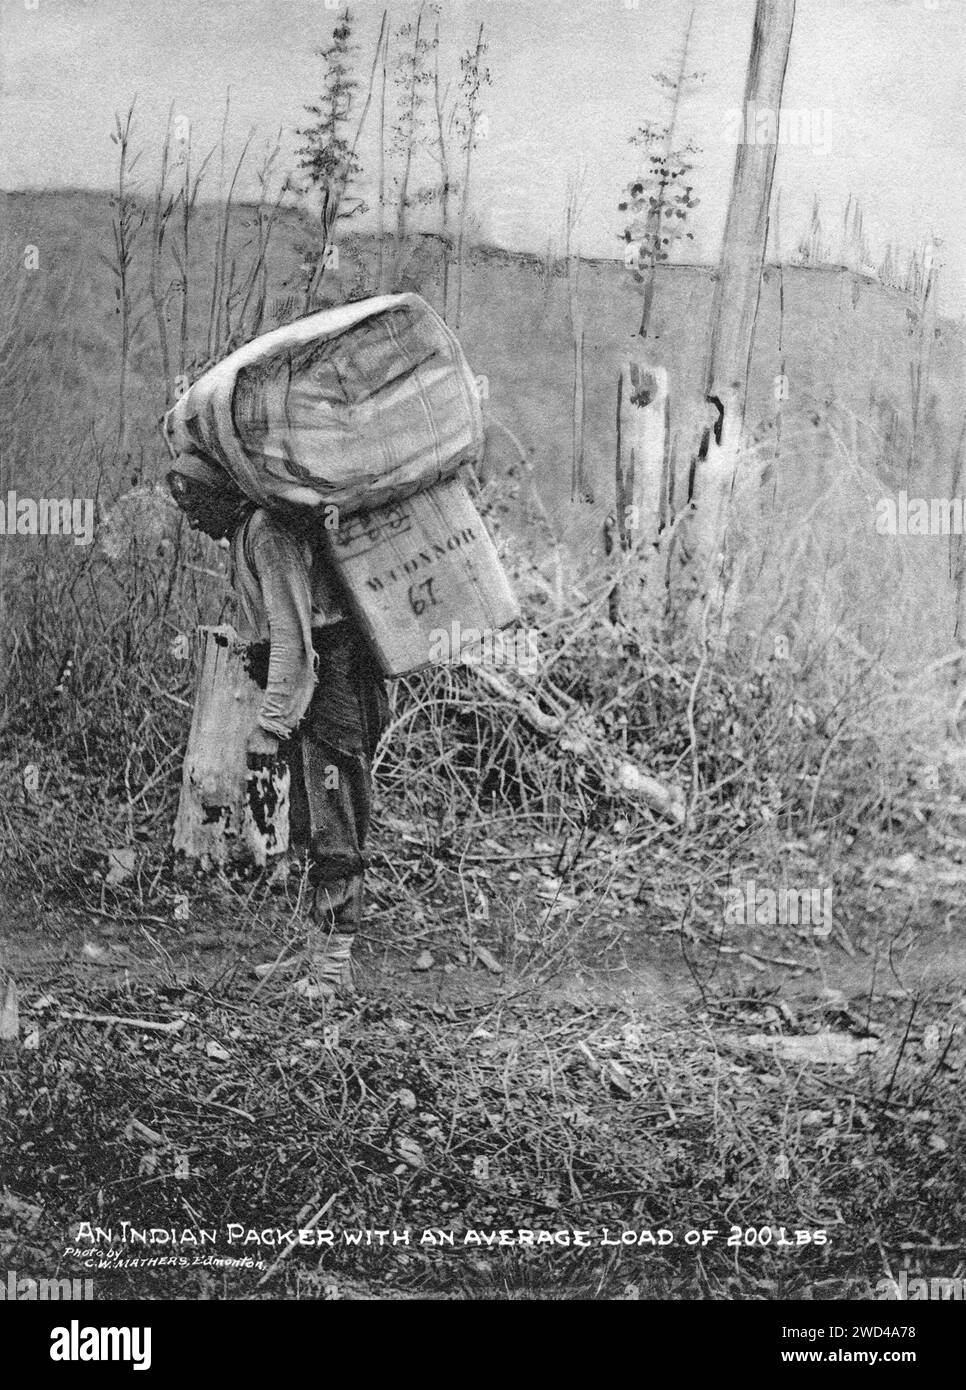 A 1901 photograph of an indigenous First Nations ‘Packer’ carrying a heavy load on his back, taken by C W Mathers on an expedition to the far north of Canada and published in his book ‘The Far North’. Mathers captioned this photograph: An Indian [First Nations] packer with an average load of 200 lbs. Stock Photo